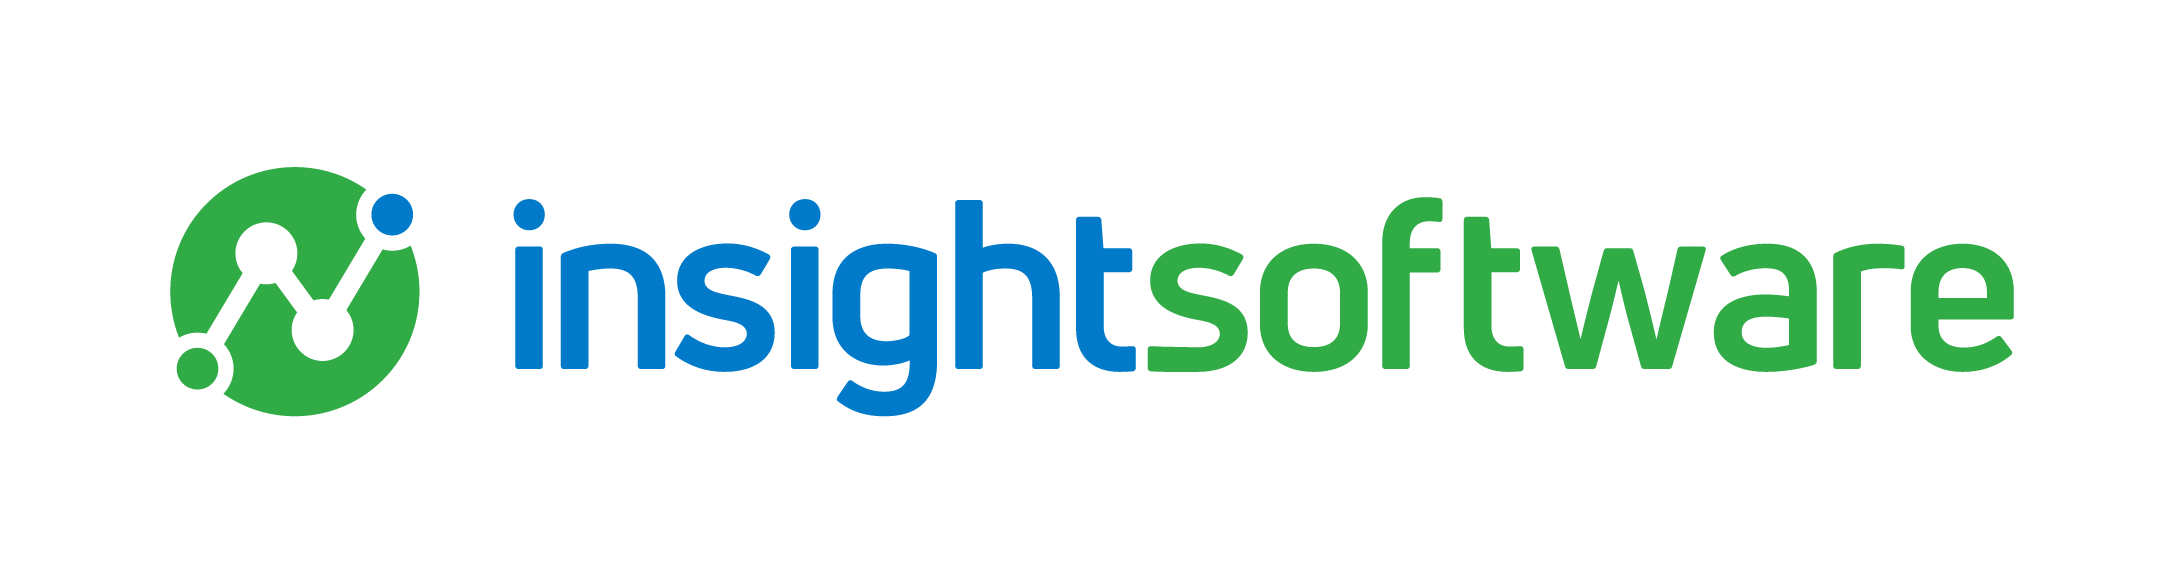 insightsoftware to S